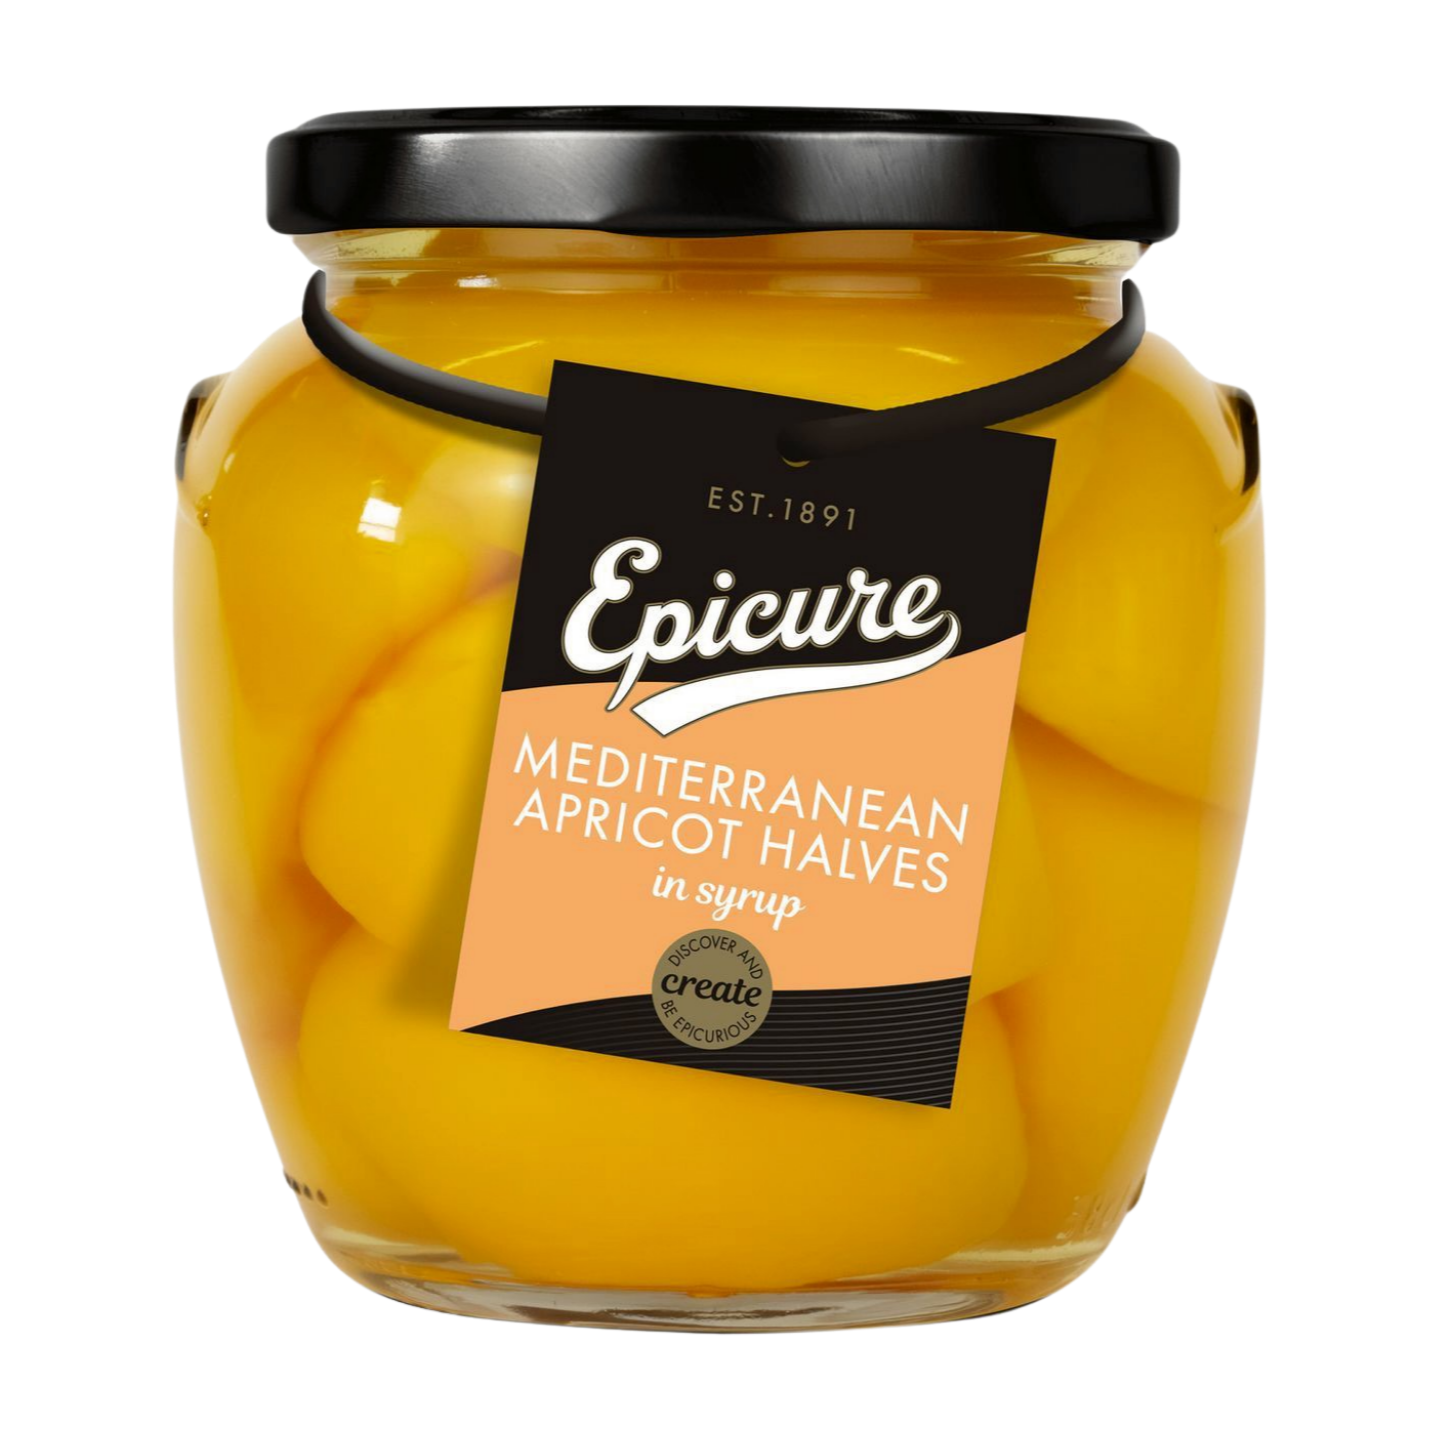 Epicure Mediterranean Apricot Halves in Syrup (540g)